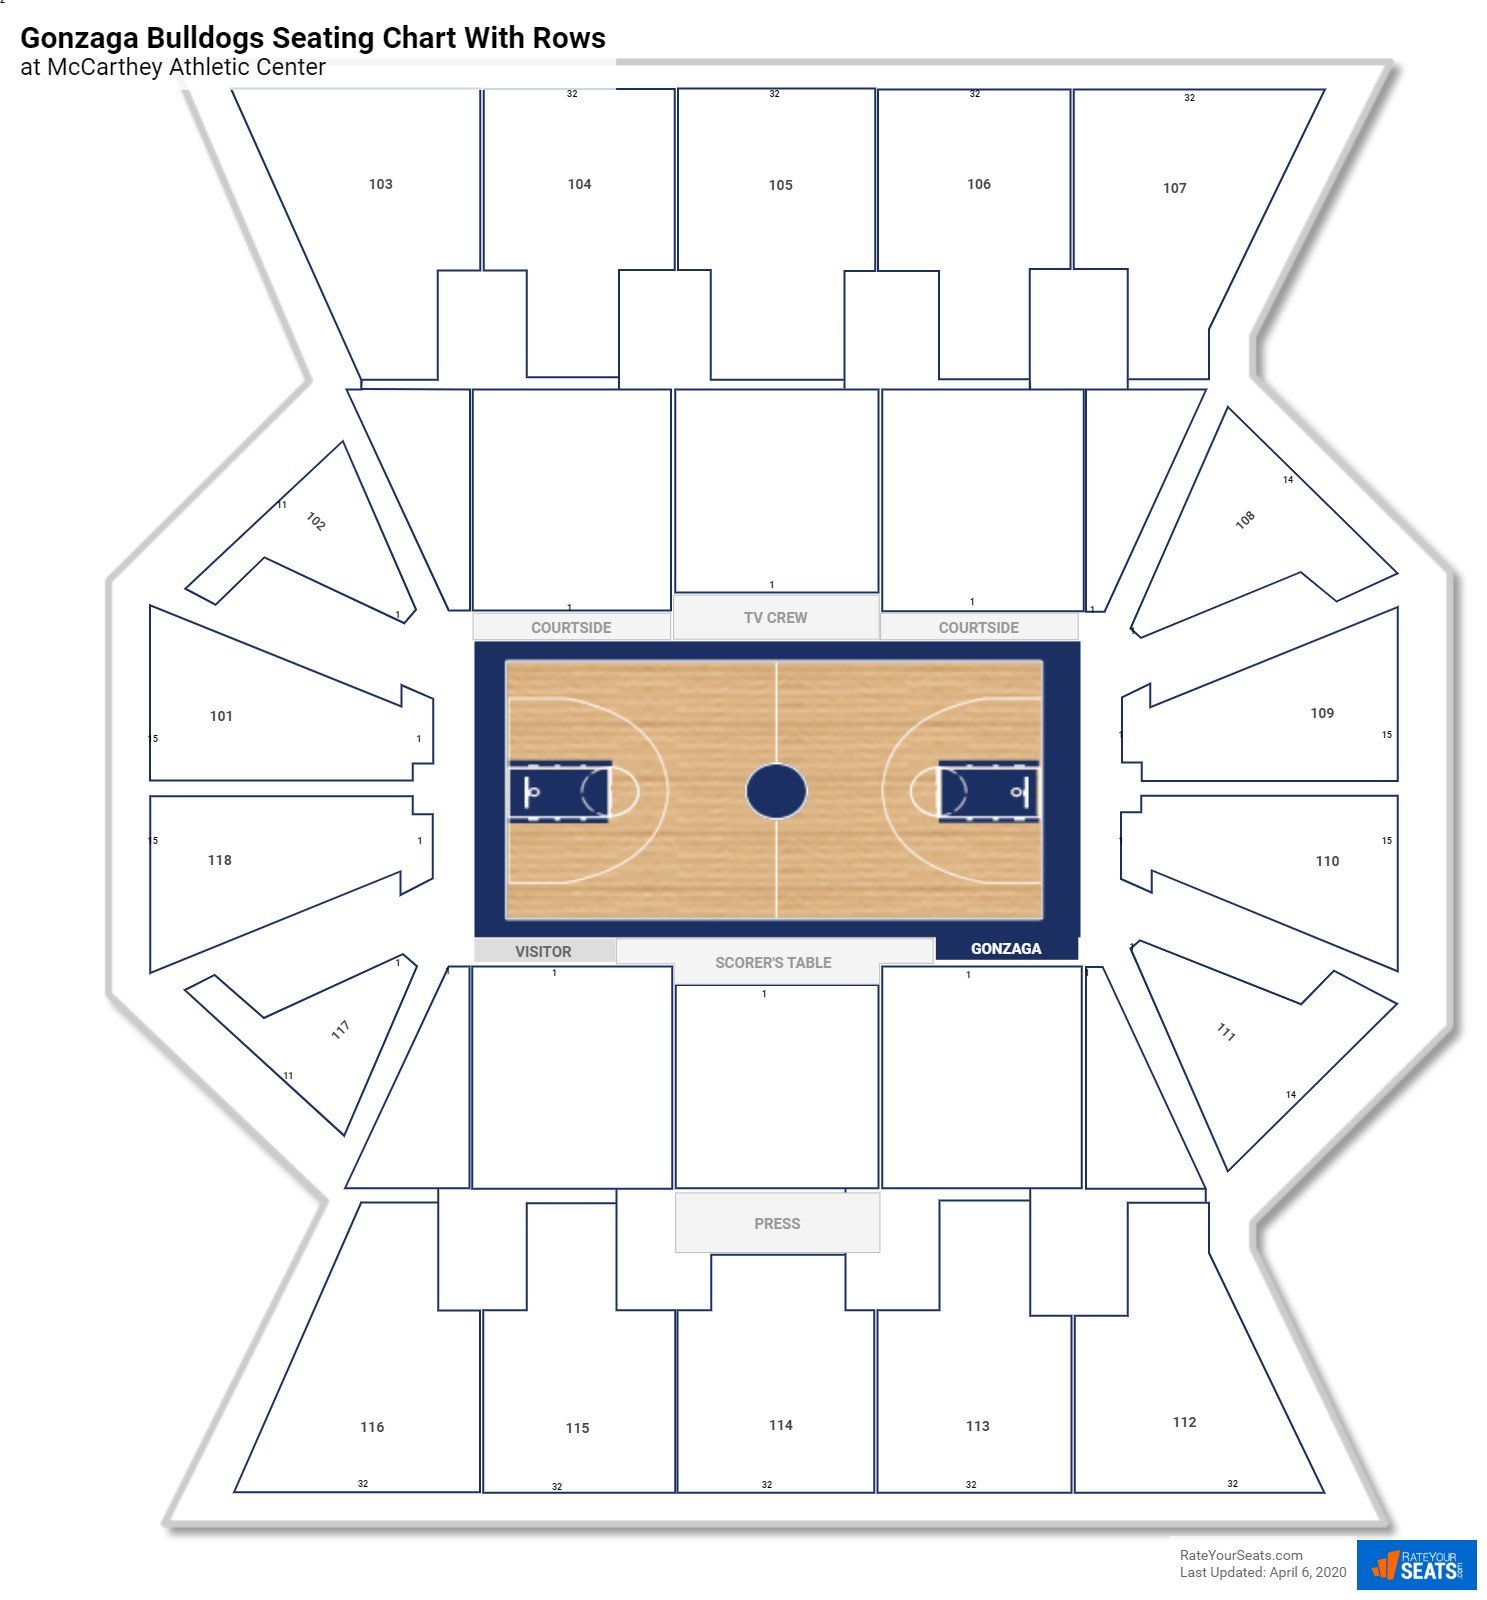 McCarthey Athletic Center seating chart with row numbers